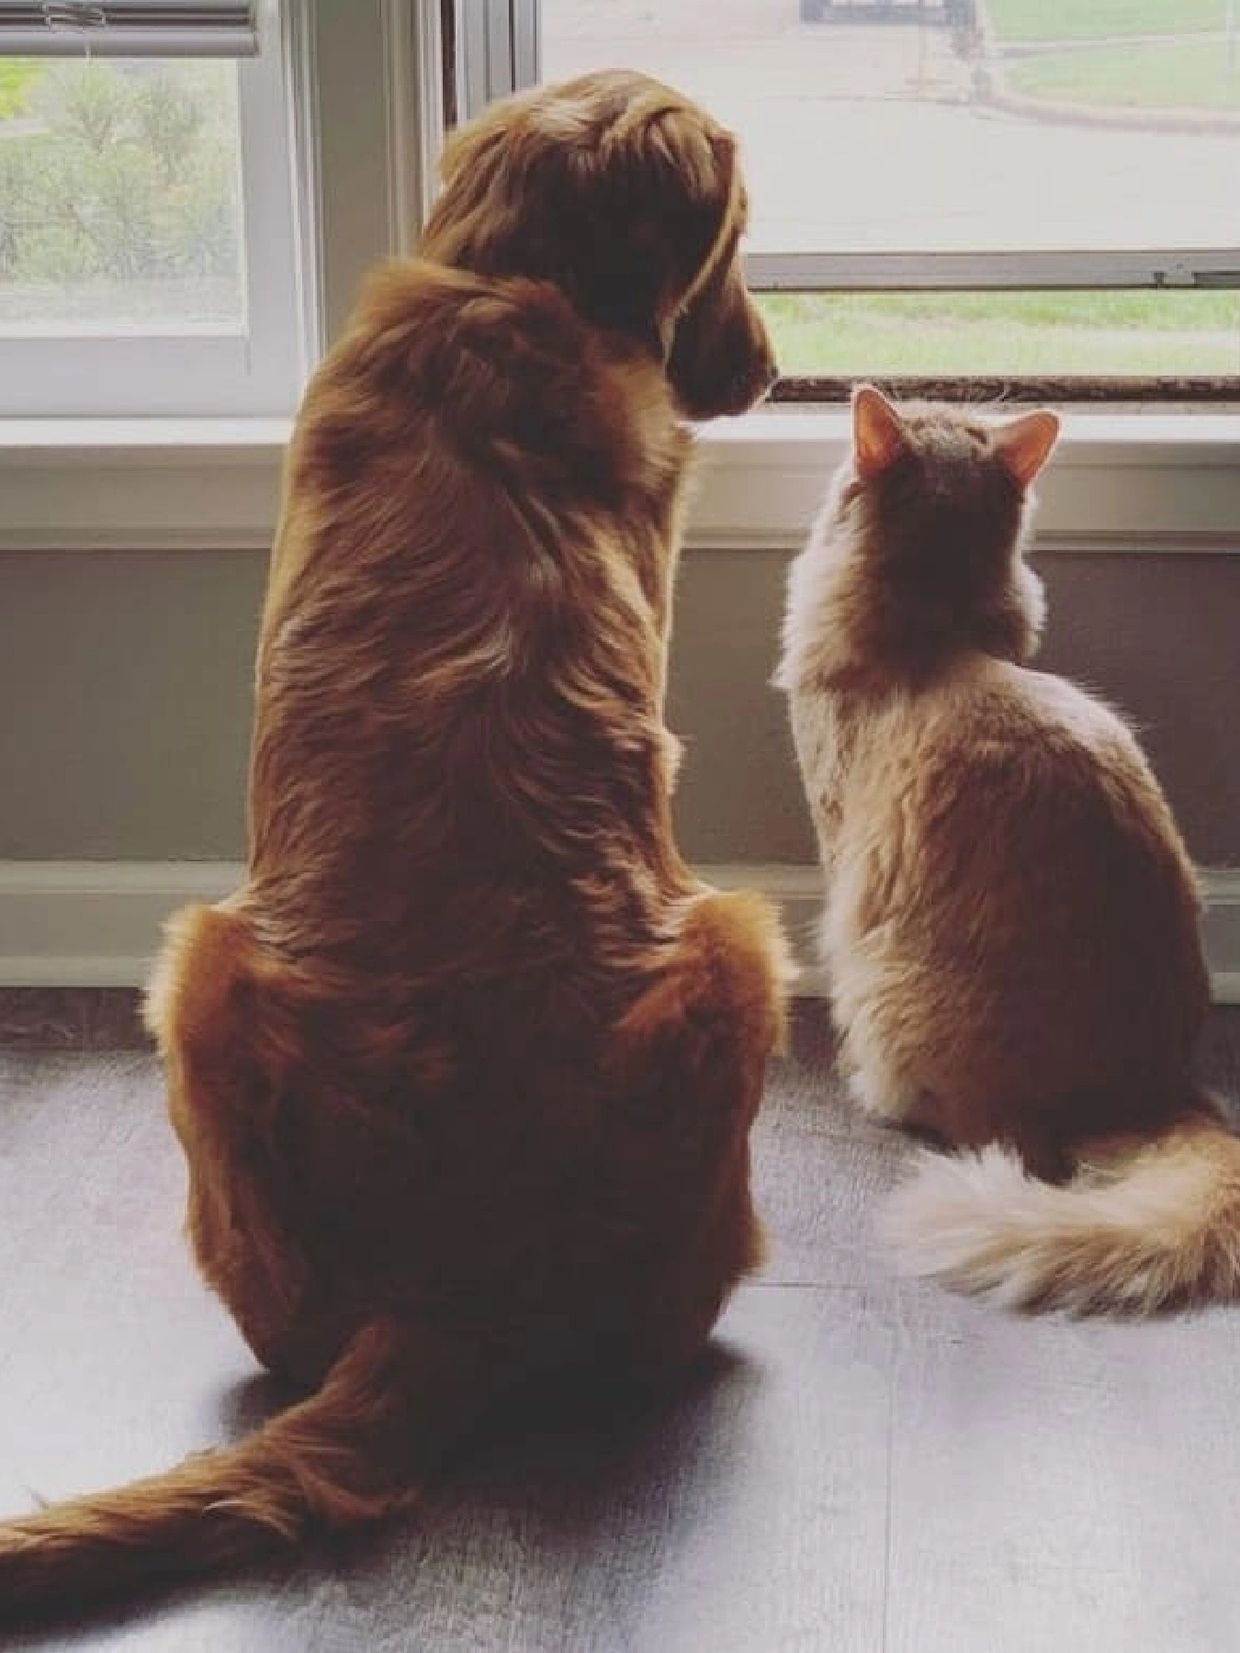 Dog and cat looking out the window